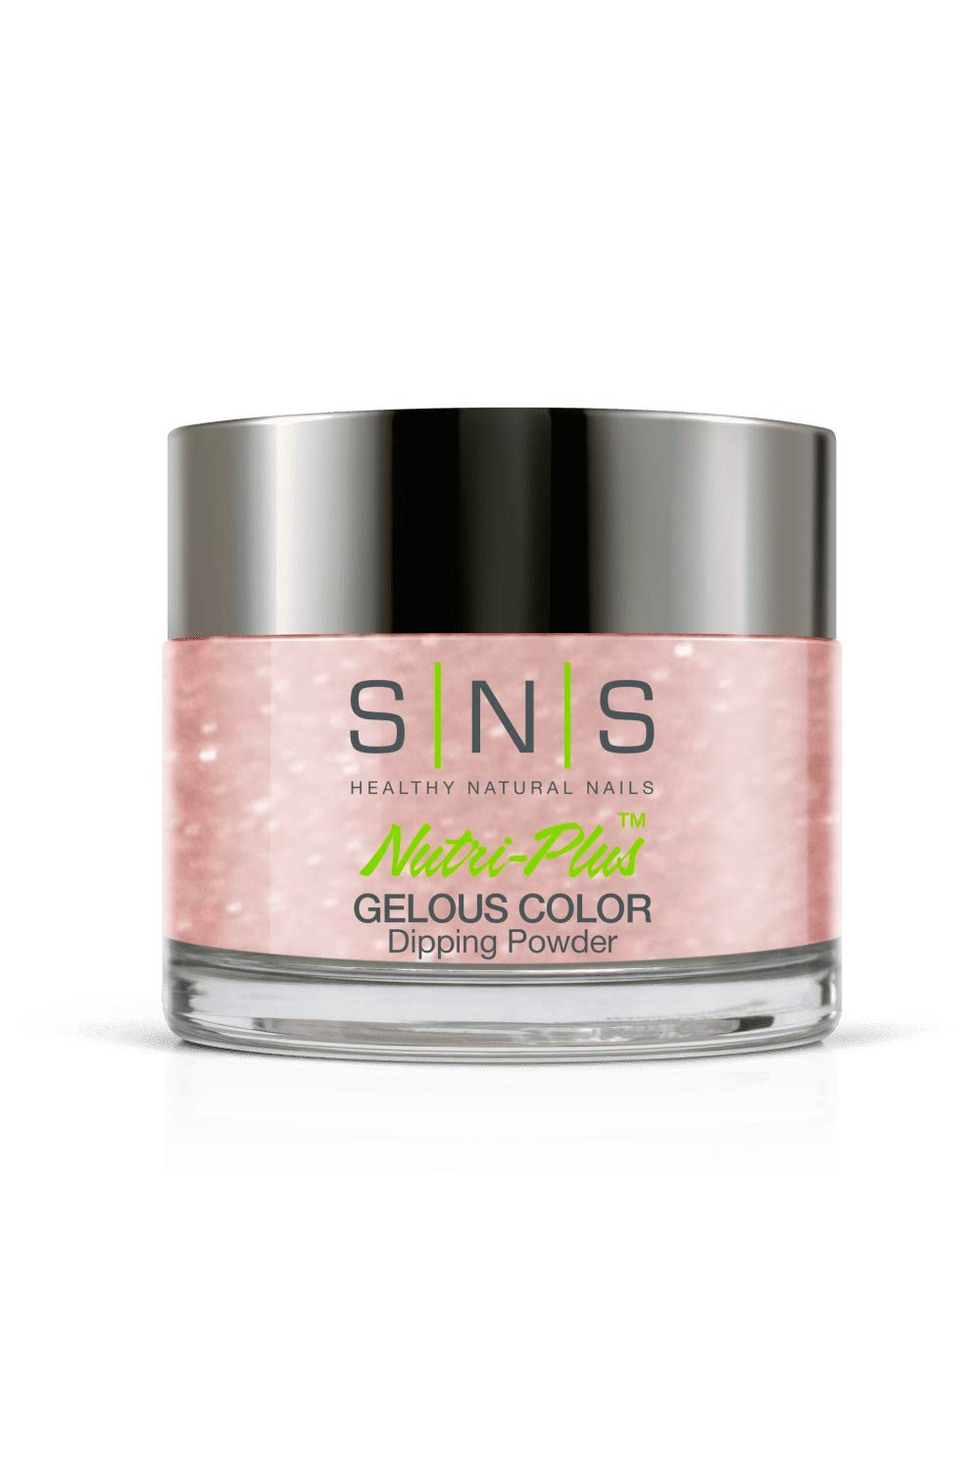 SNS Nails Dipping Powder Gelous Colo